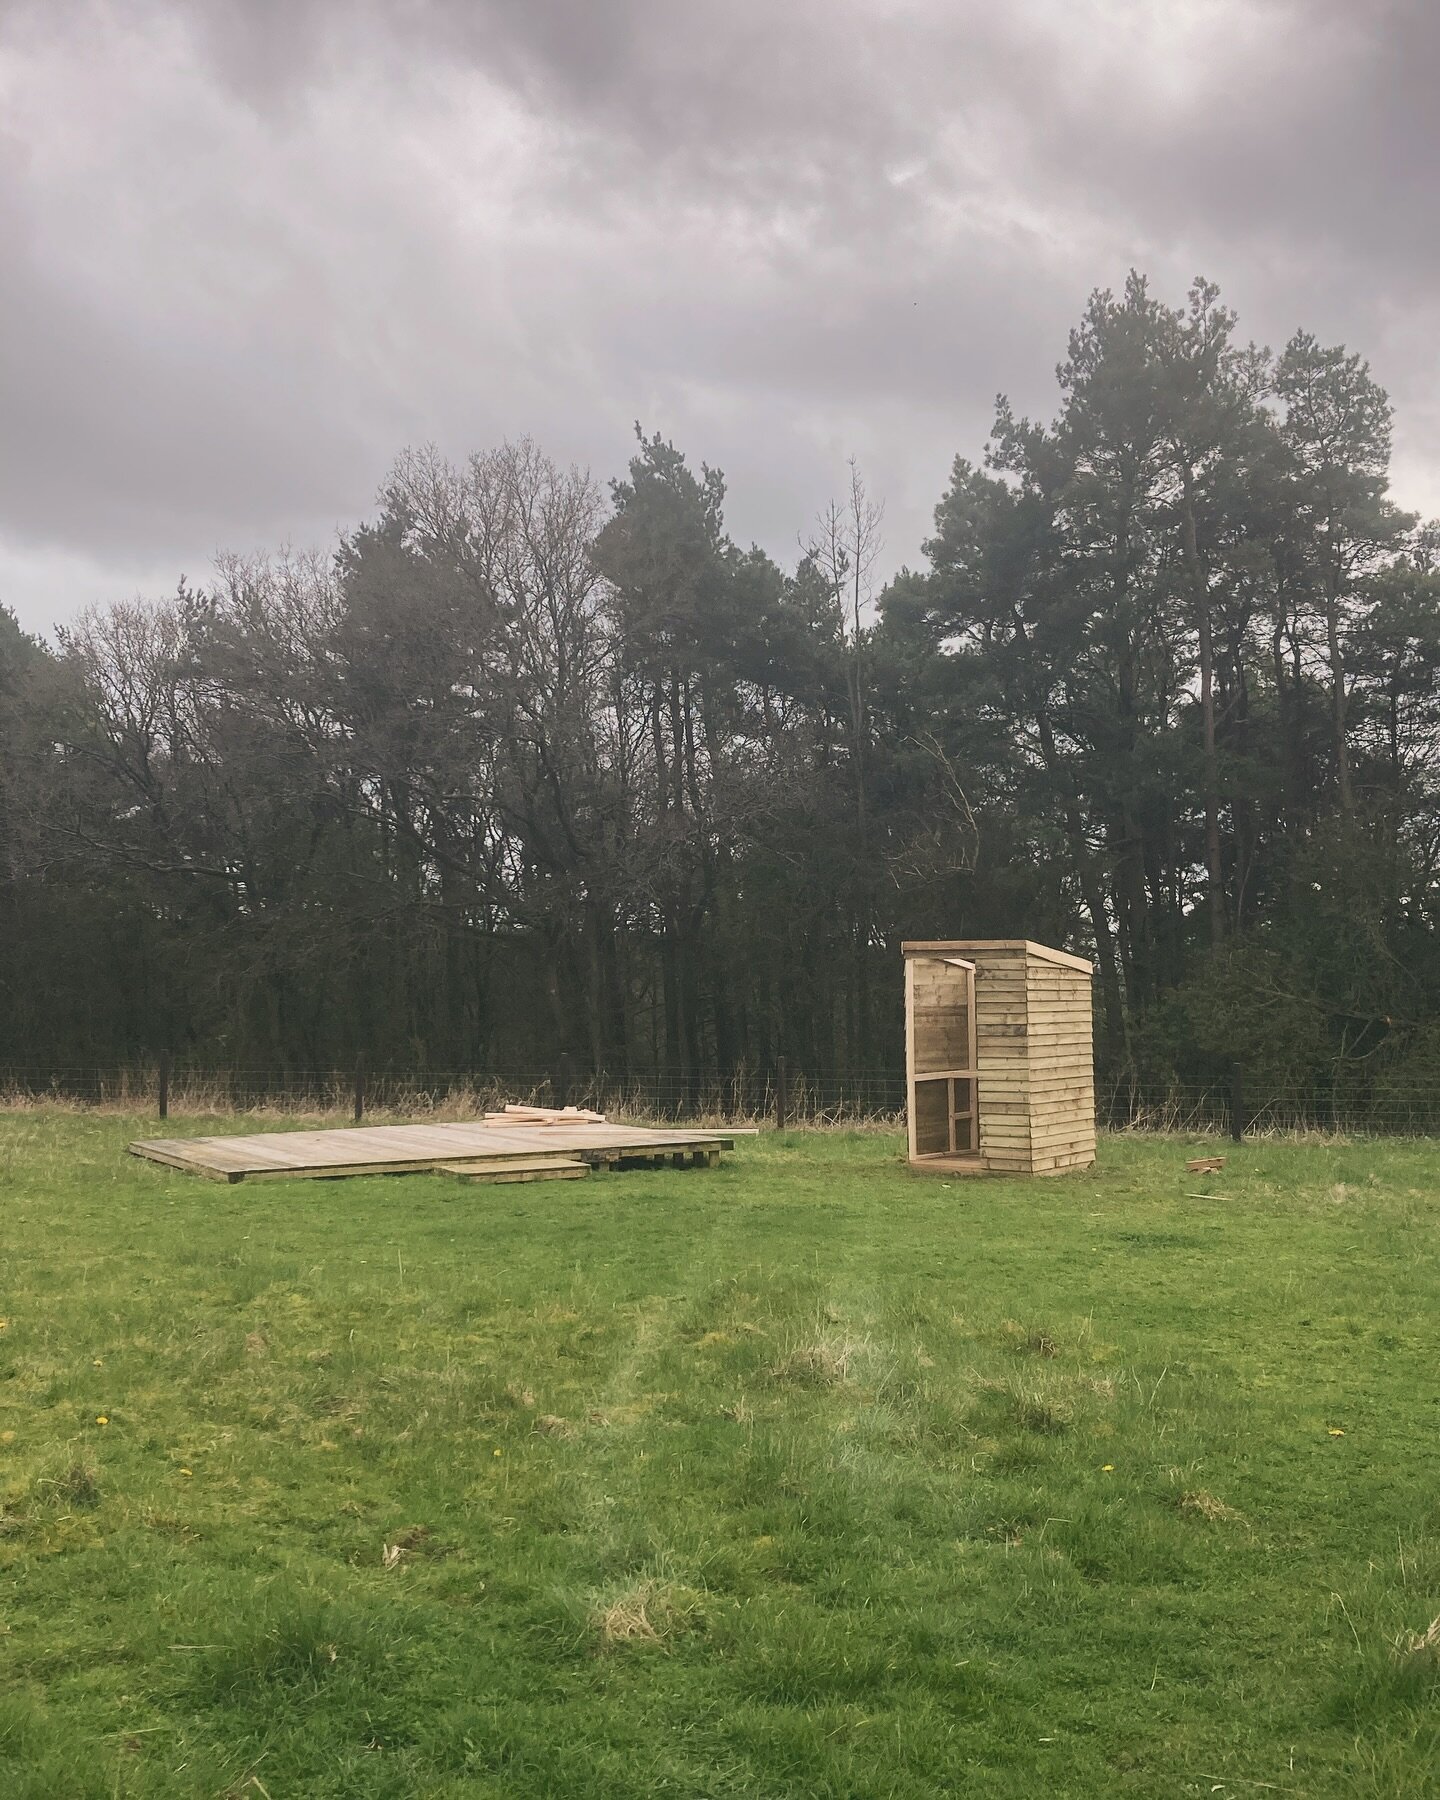 Kenny and I have been busy building kitchen sheds for the bell tents&hellip;new for this year, every bell tent will have its own gas stove in a little kitchenette. 

#glampingessentials #outdoorkitchen #campkitchen